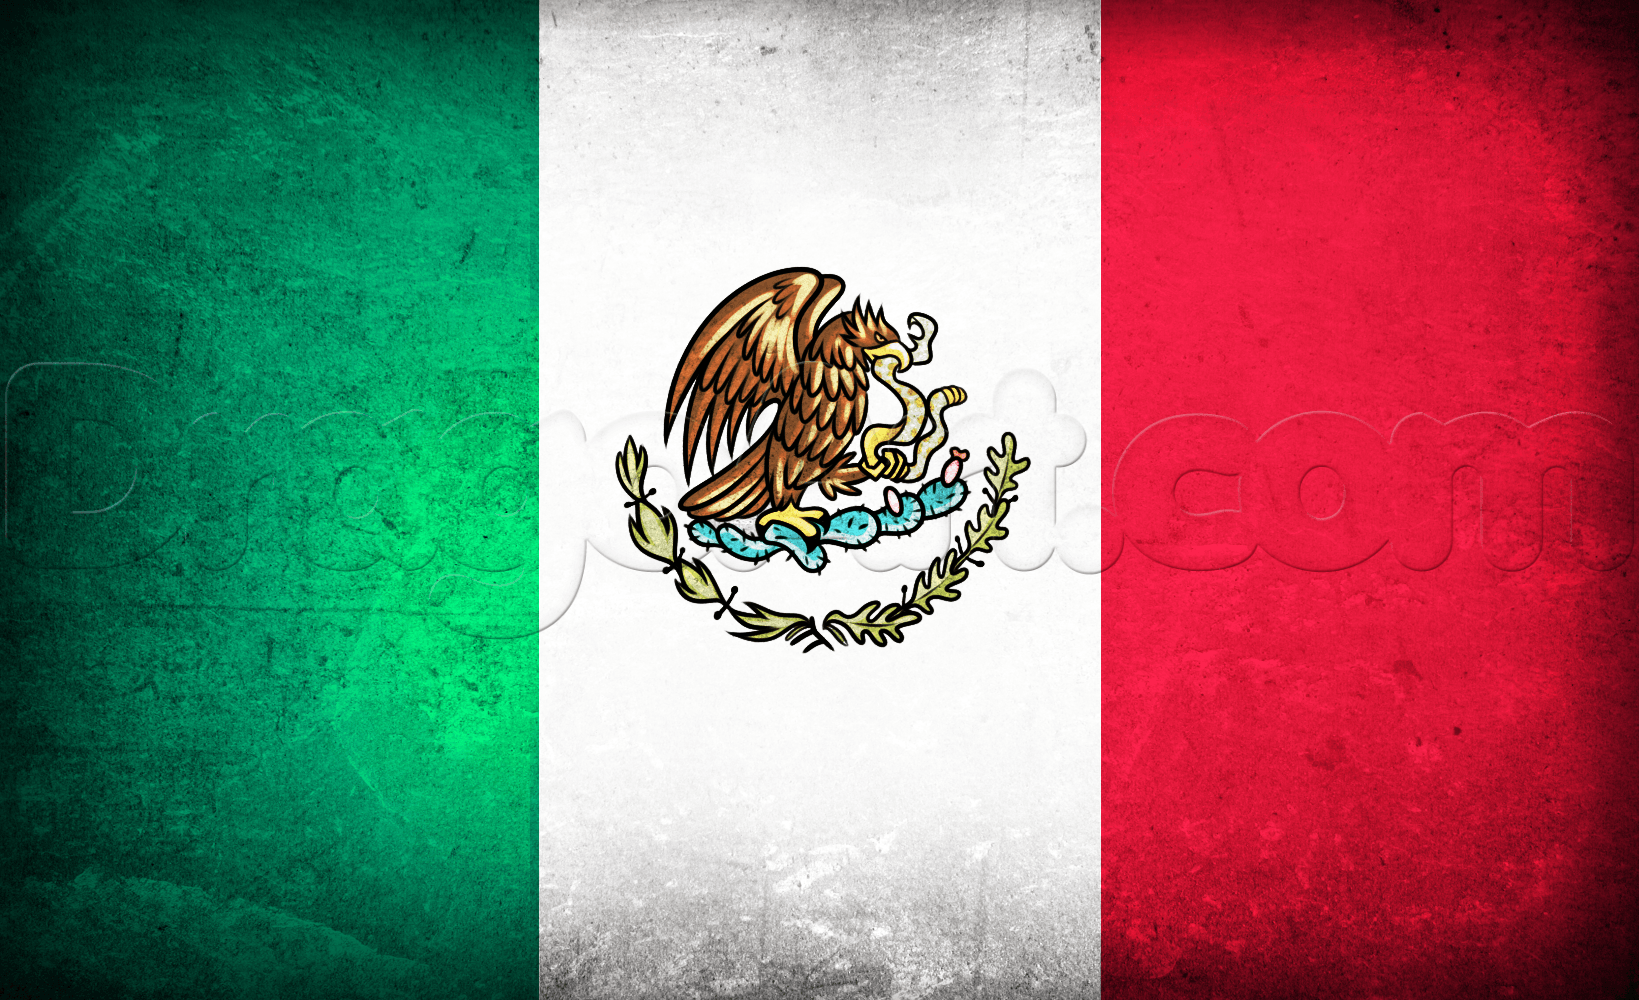 Pioneering Mexico Picture Flag HD Wallpaper Background Image Viva